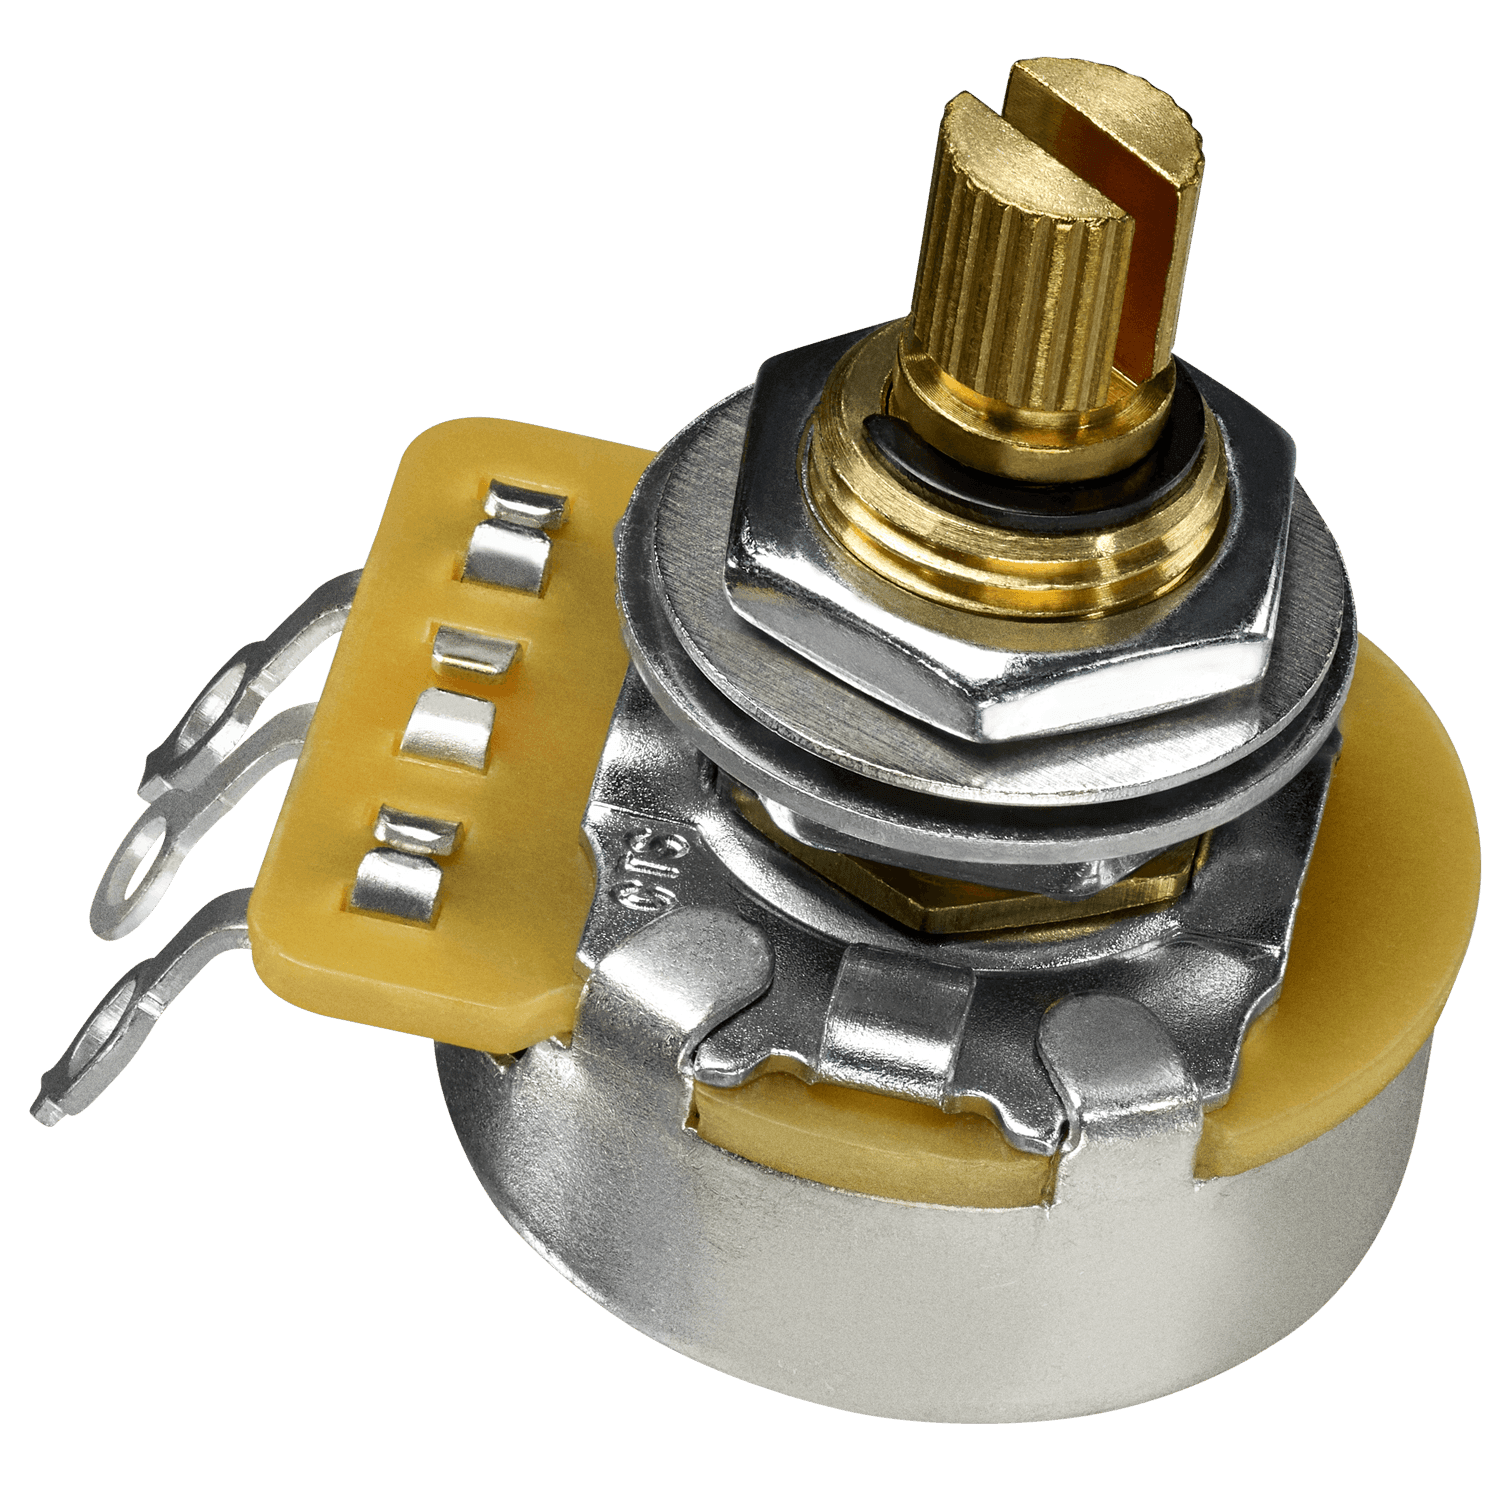 Potentiometer 250K 9 mm/6.5 mm/22-21mm - Guitars - Parts and Accessories by Dimarzio at Muso's Stuff